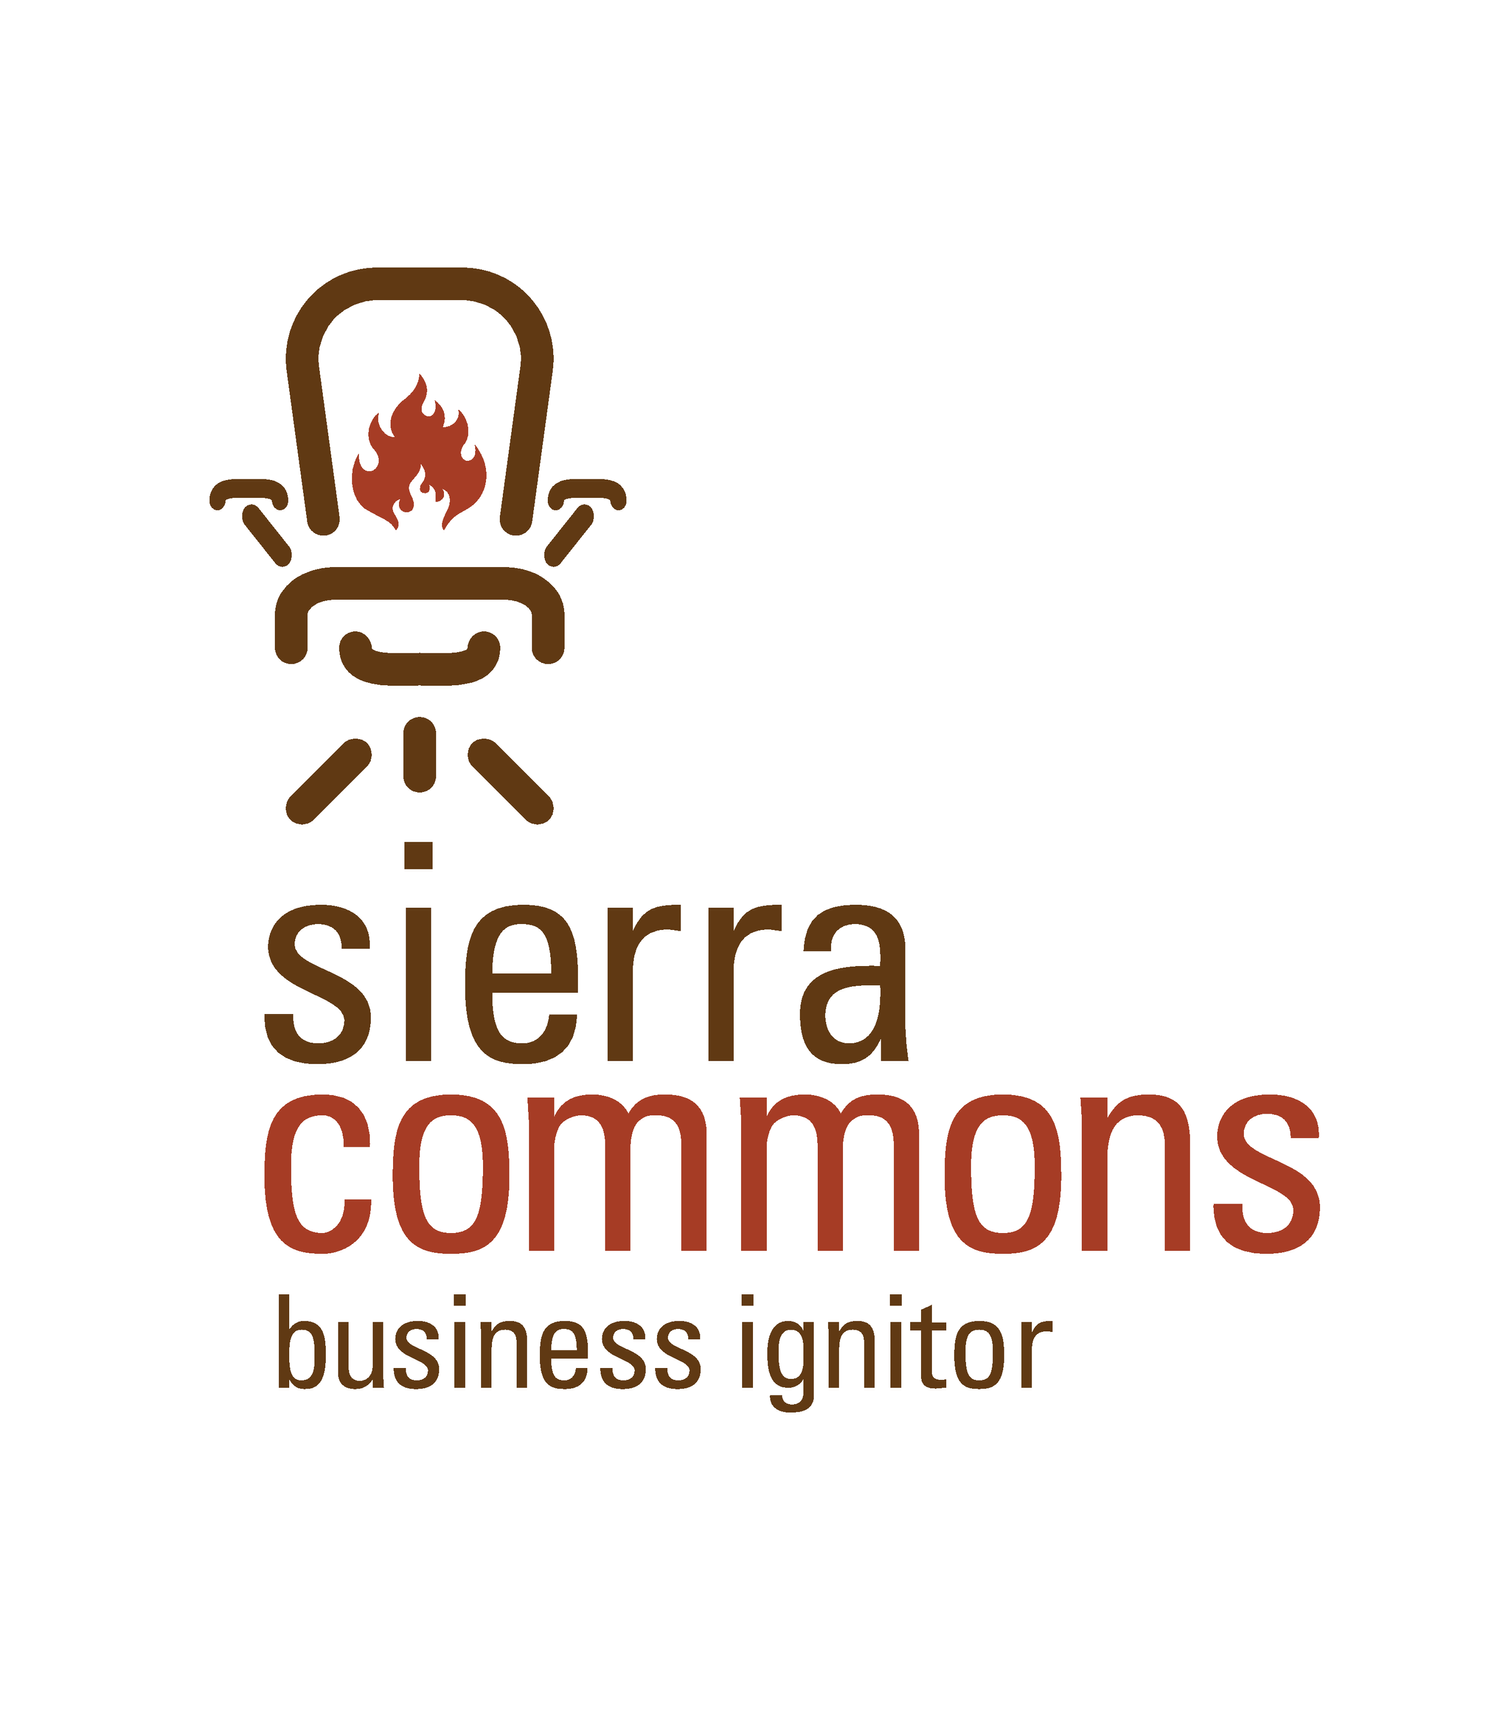 Sierra Commons - Nevada City Coworking and Business Incubator  